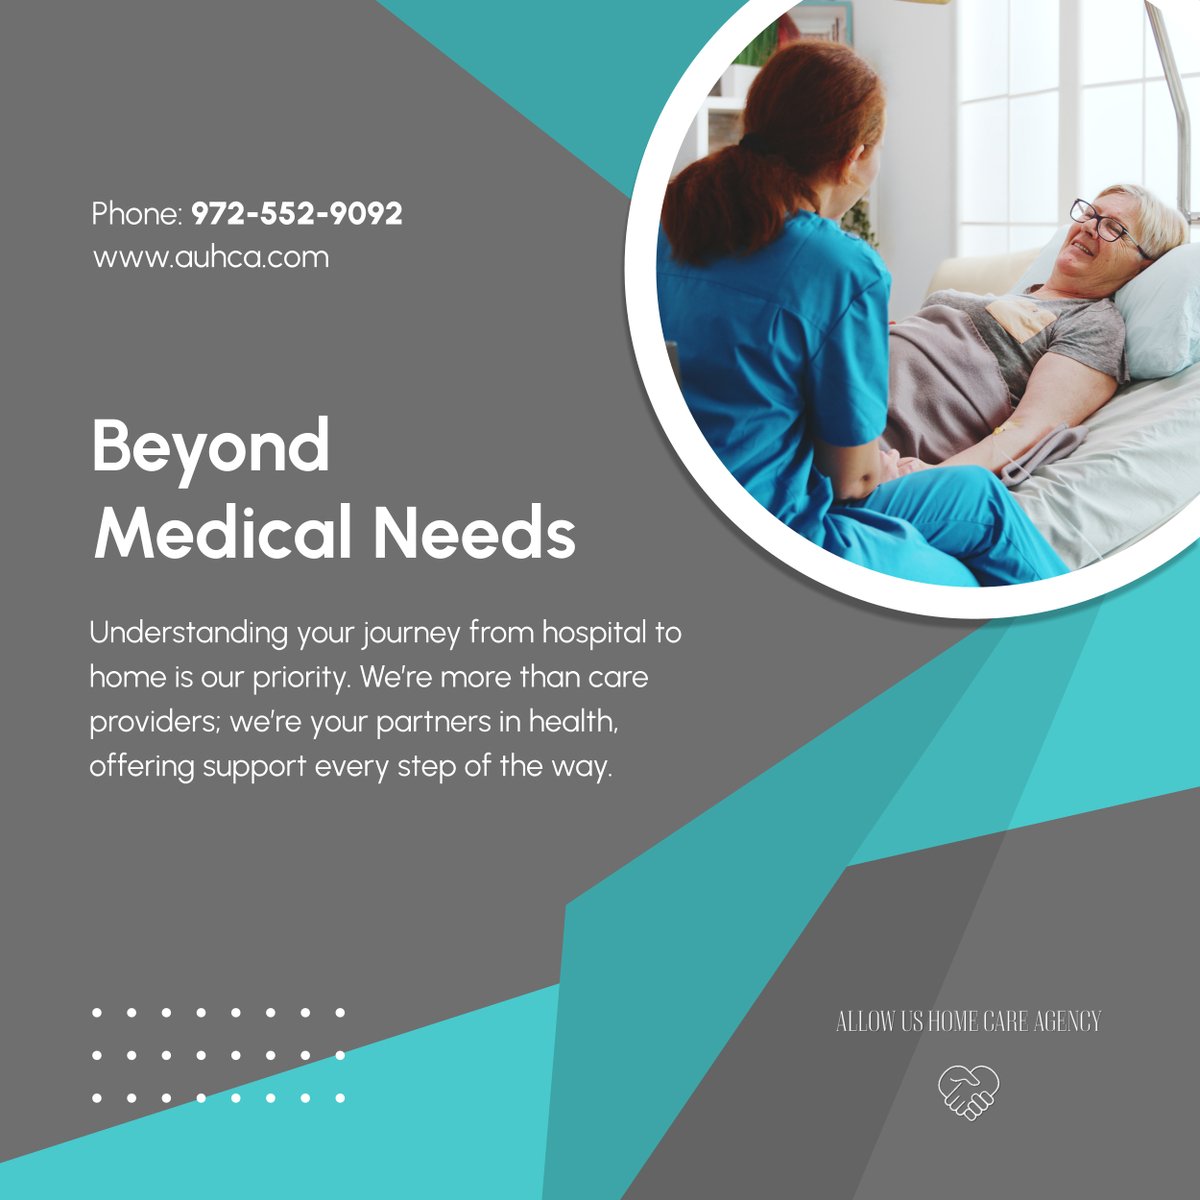 We understand the complexities of transitioning from hospital to home, and we're ready to support you not just medically but emotionally and practically every step of the way. 

#MedicalNeeds #BeyondMedical #HomeCare